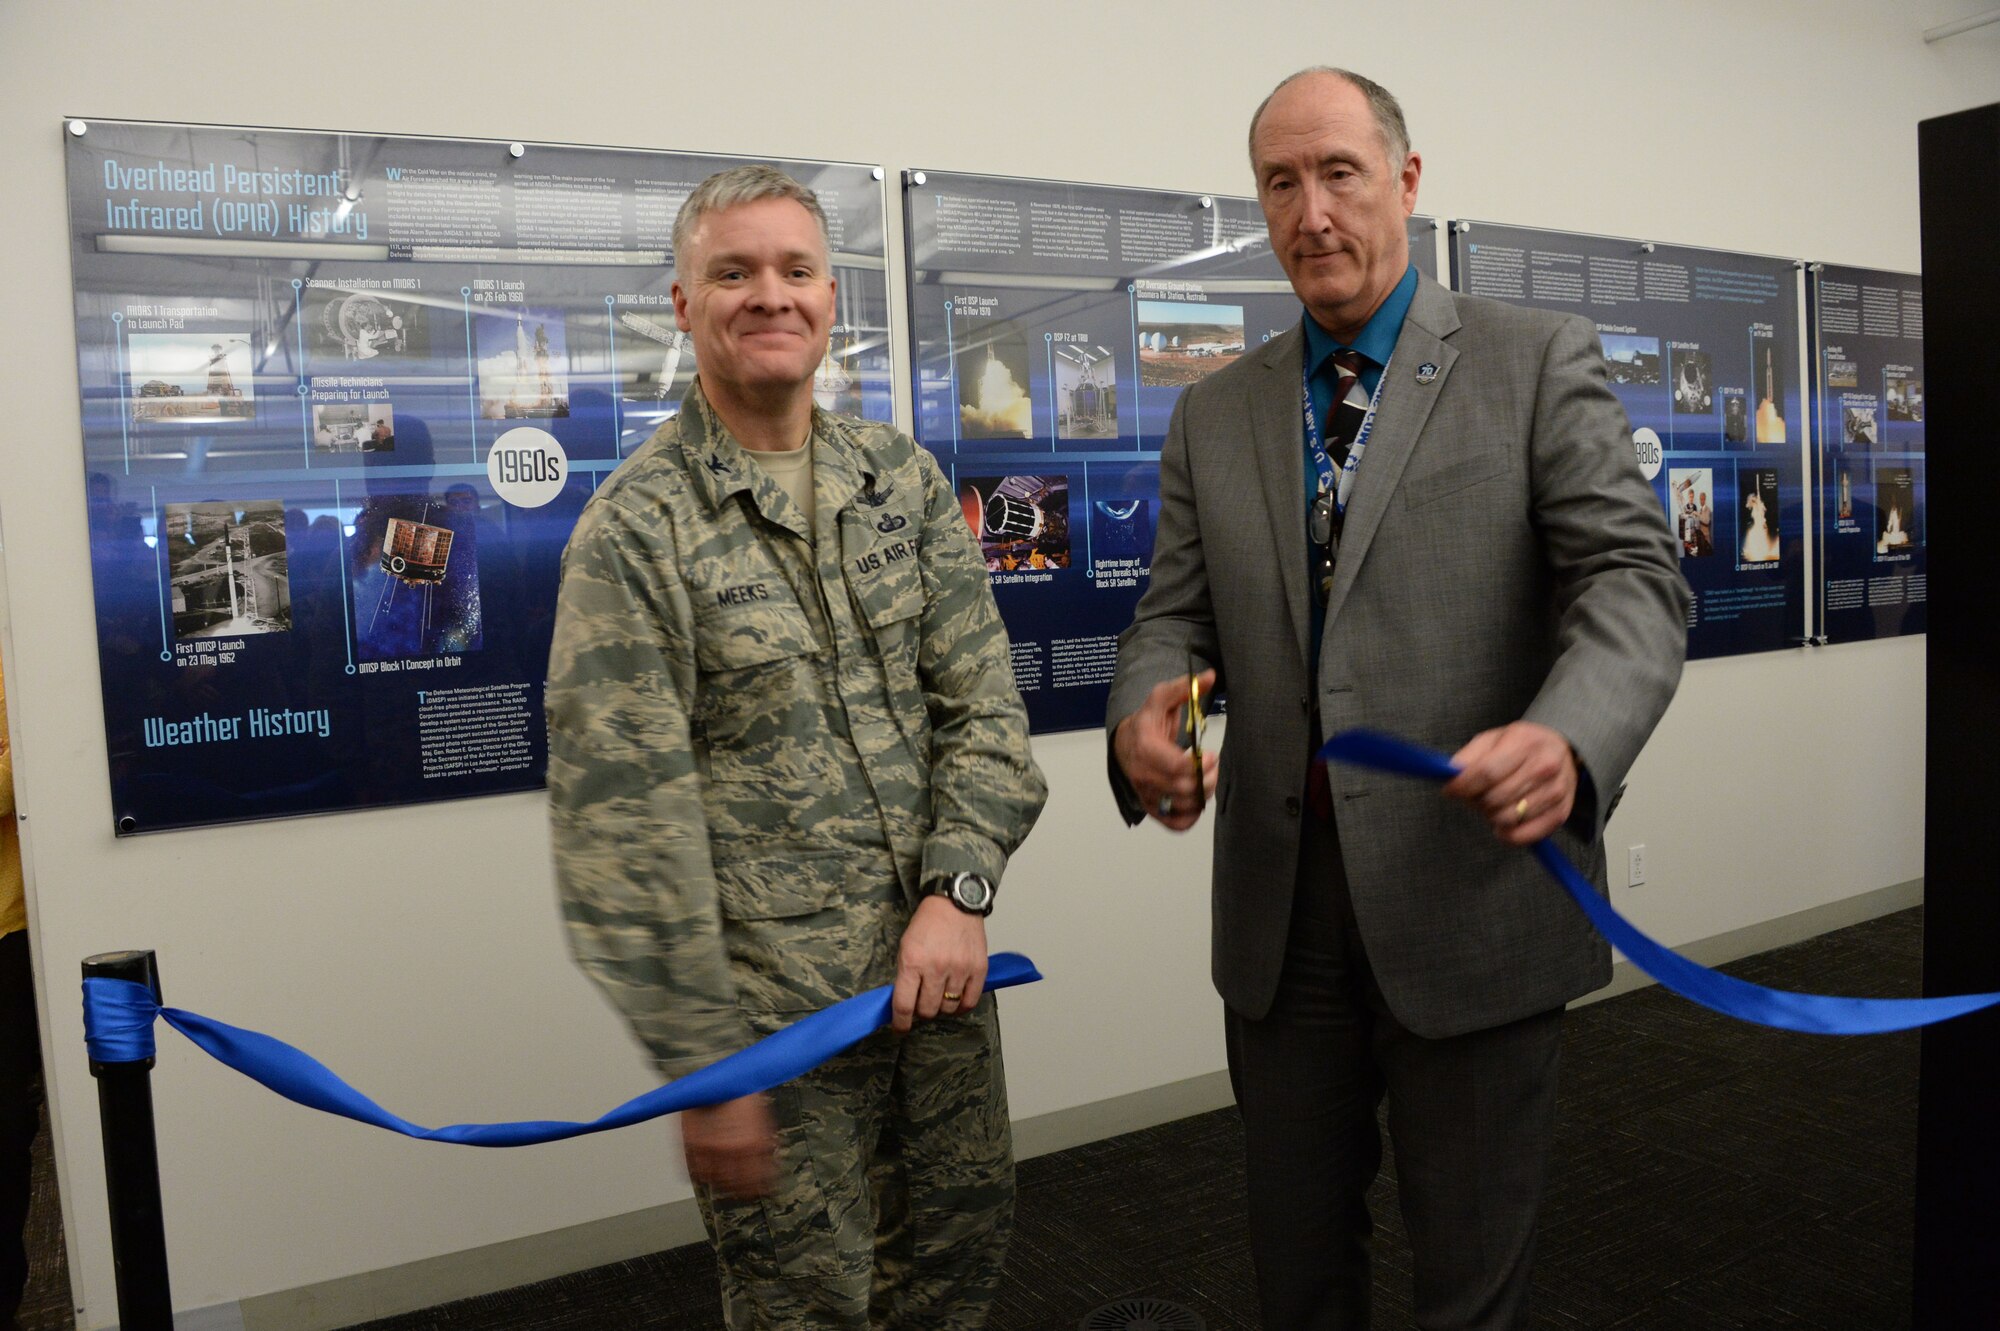 Col. Tony Meeks, deputy director of the Space and Missile Systems Center’s Remote Sensing Systems Directorate, and Dr. Steve Pluntze, RS Directorate executive director and civilian deputy director, cut a ceremonial ribbon to unveil the Remote Sensing Heritage Wall at Los Angeles Air Force Base in El Segundo, Calif., March 15, 2017. The ceremony commemorates an SMC mission that spans nearly six decades of providing global, persistent, infrared surveillance and environmental monitoring capabilities to our warfighters and the nation. (U.S. Air Force photo / Van De Ha)